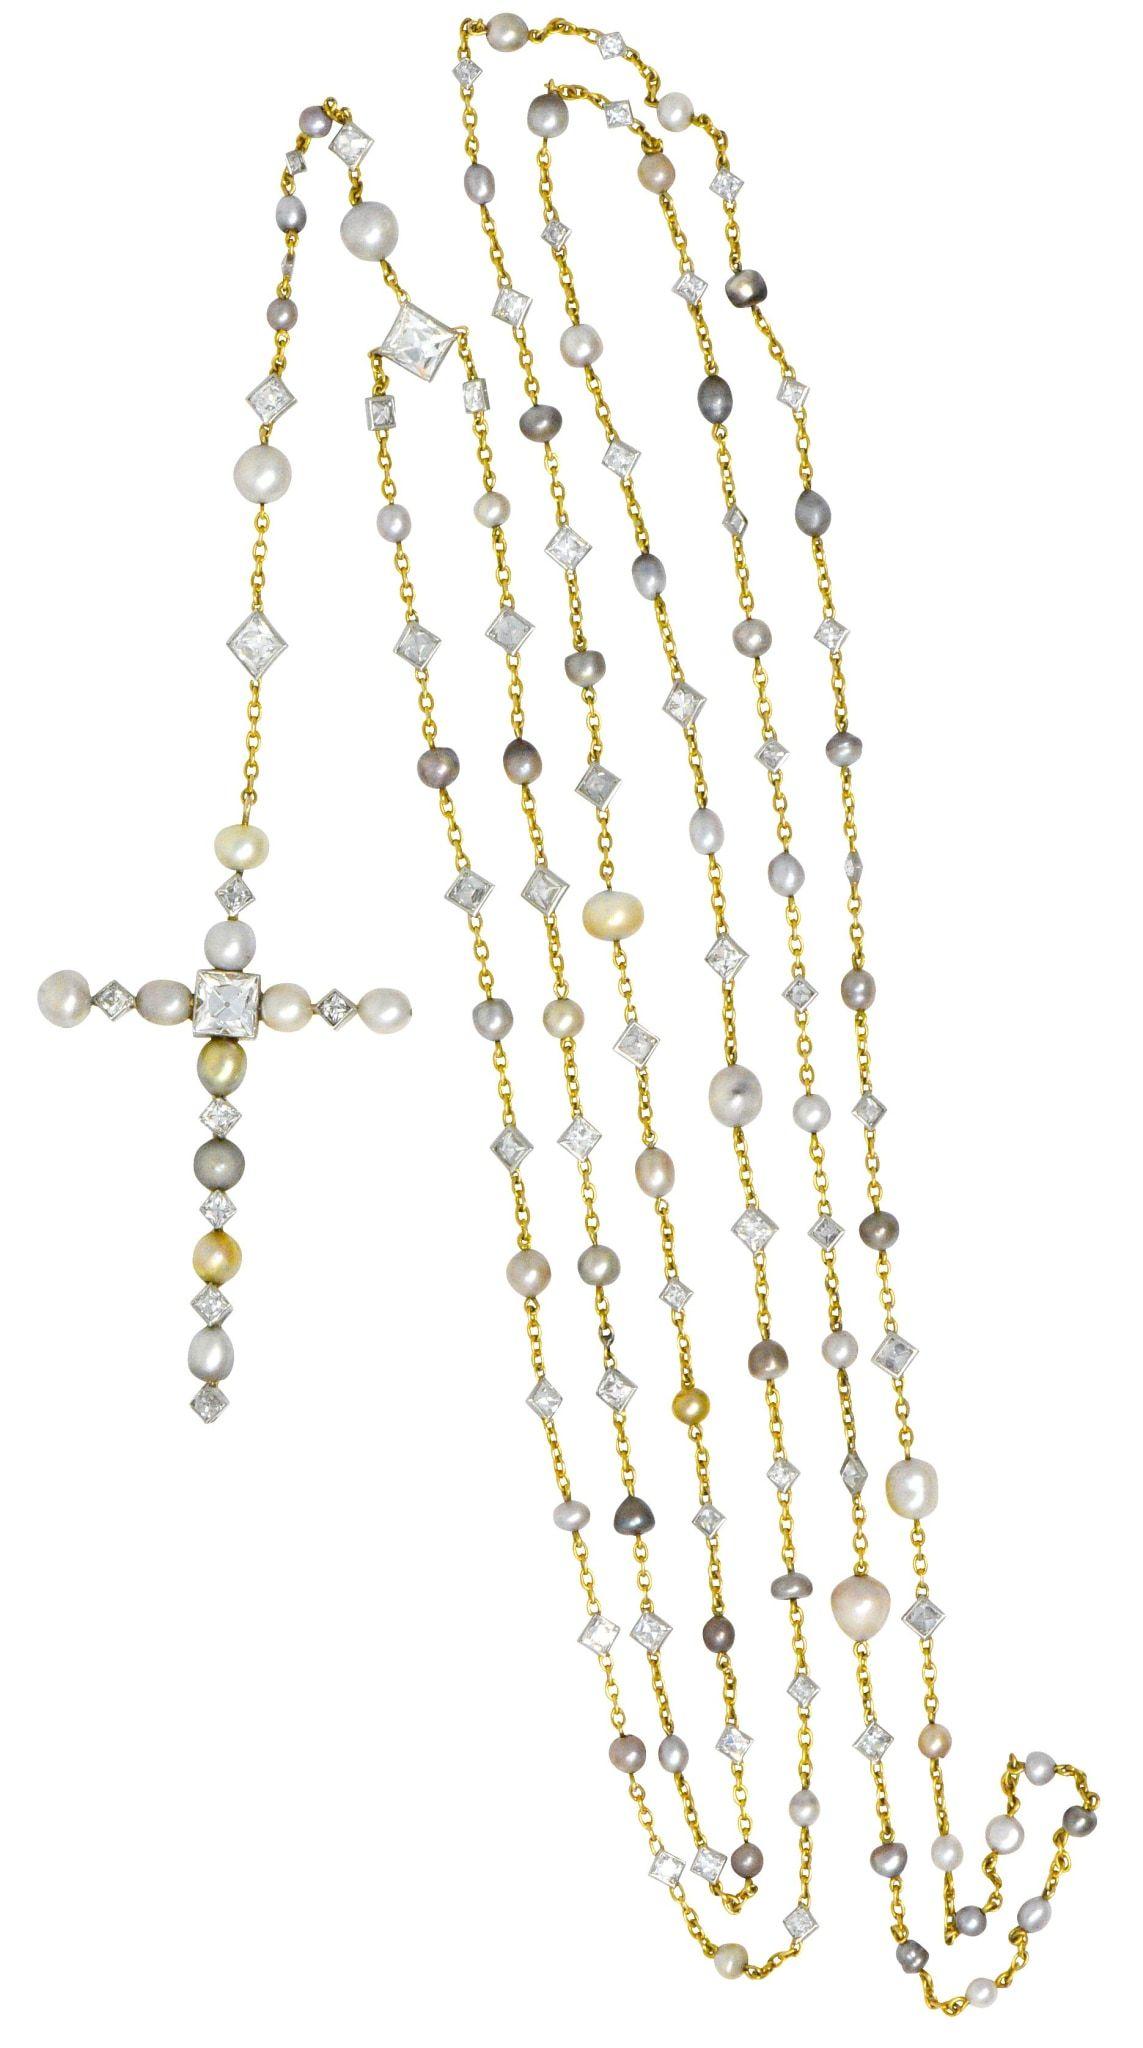 Designed as a rosary with stations, a drop and terminating in a cross

Cross centering a French cut diamond weighing approximately 1.80 carats, and set with natural pearls and smaller French cut diamonds

Necklace with natural pearls and French cut